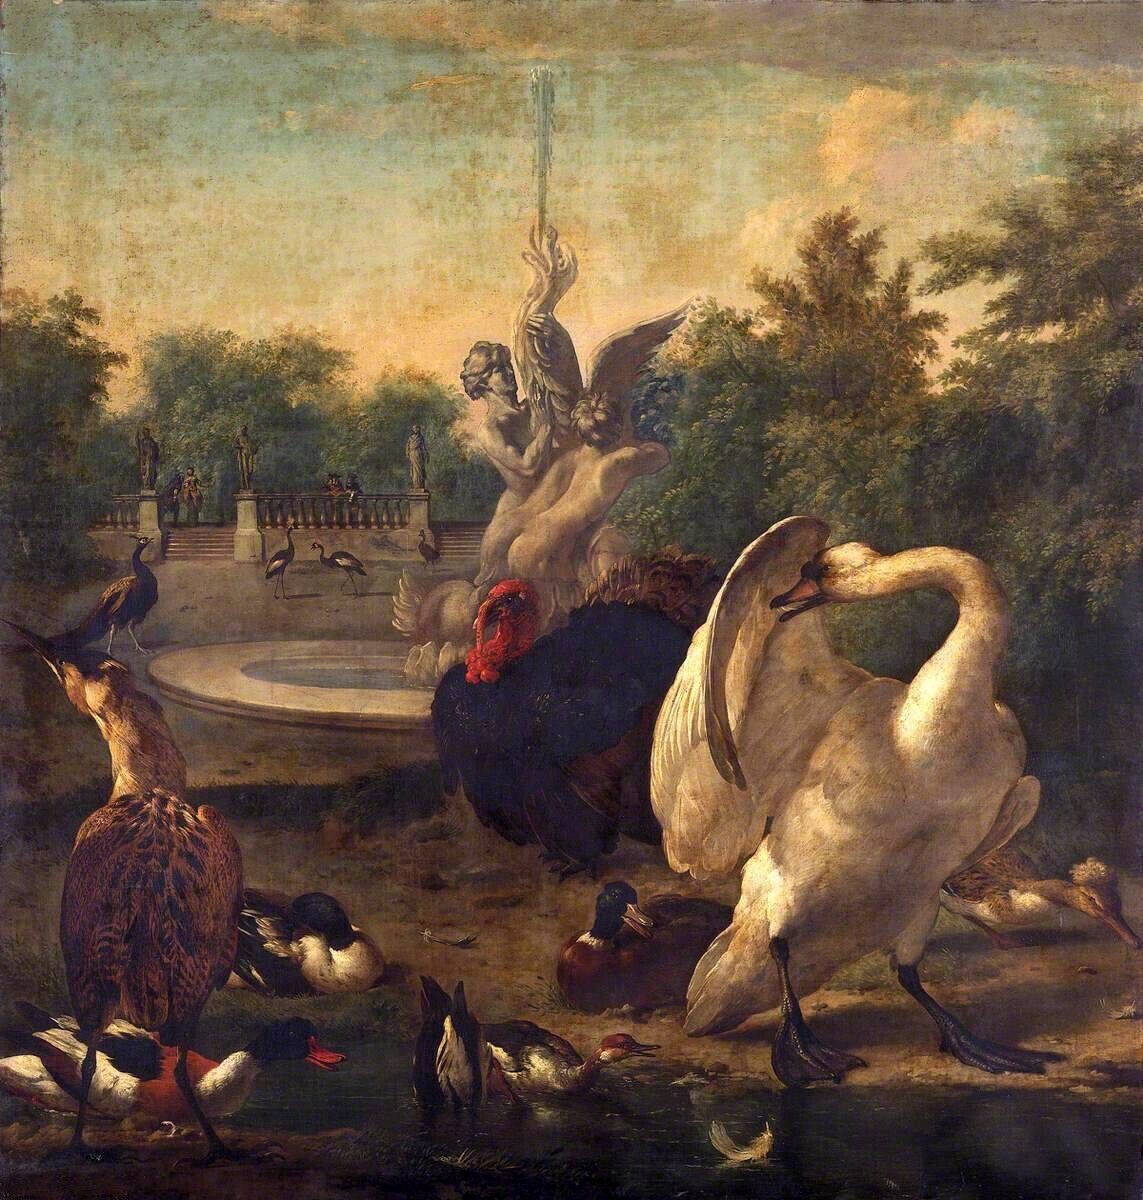 Art Oil painting Melchior-De-Hondecoeter-A-Park-with-a-Swan-and-Other-Bird